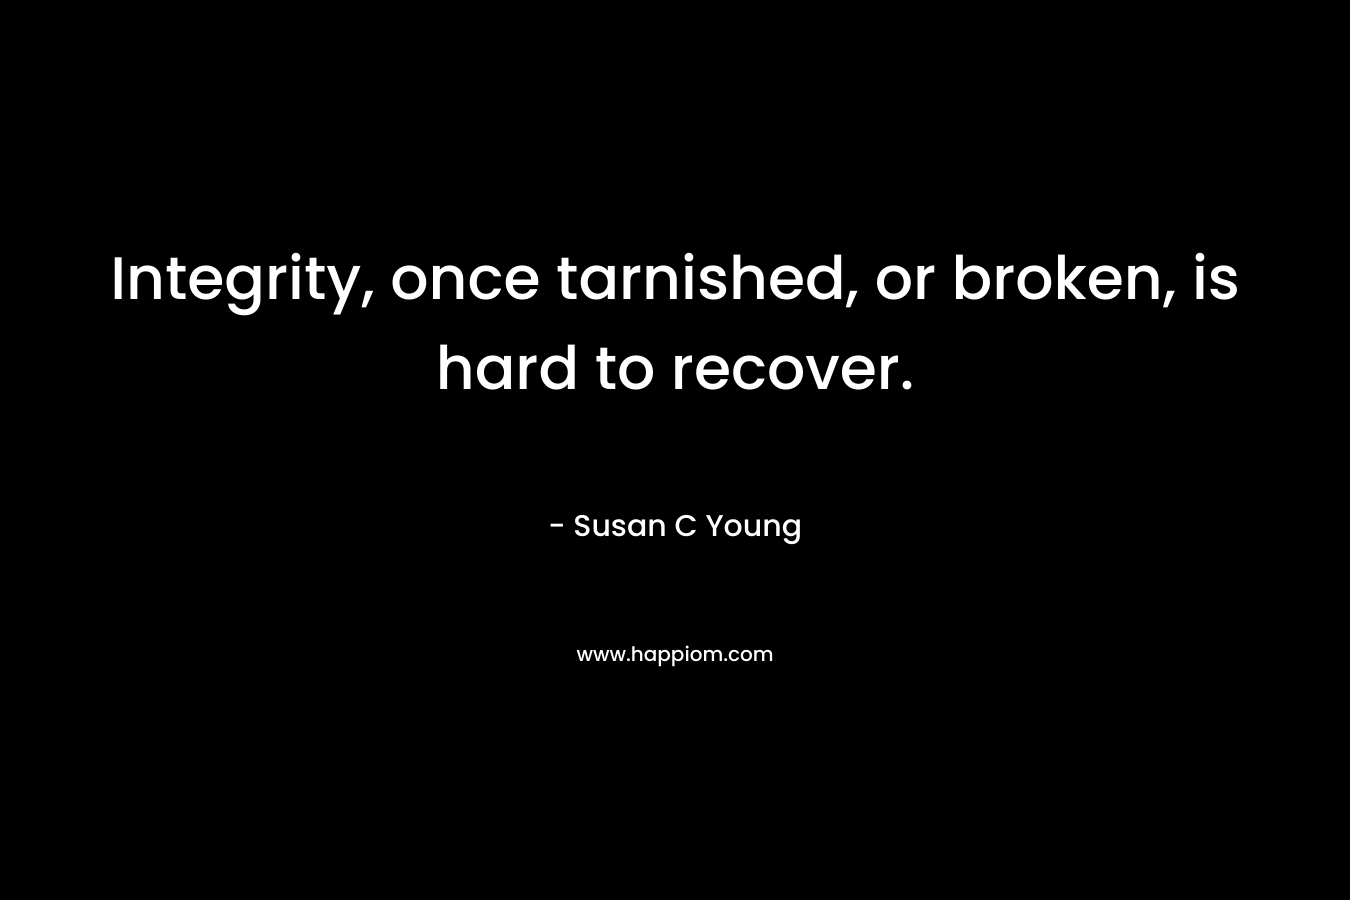 Integrity, once tarnished, or broken, is hard to recover. – Susan C Young